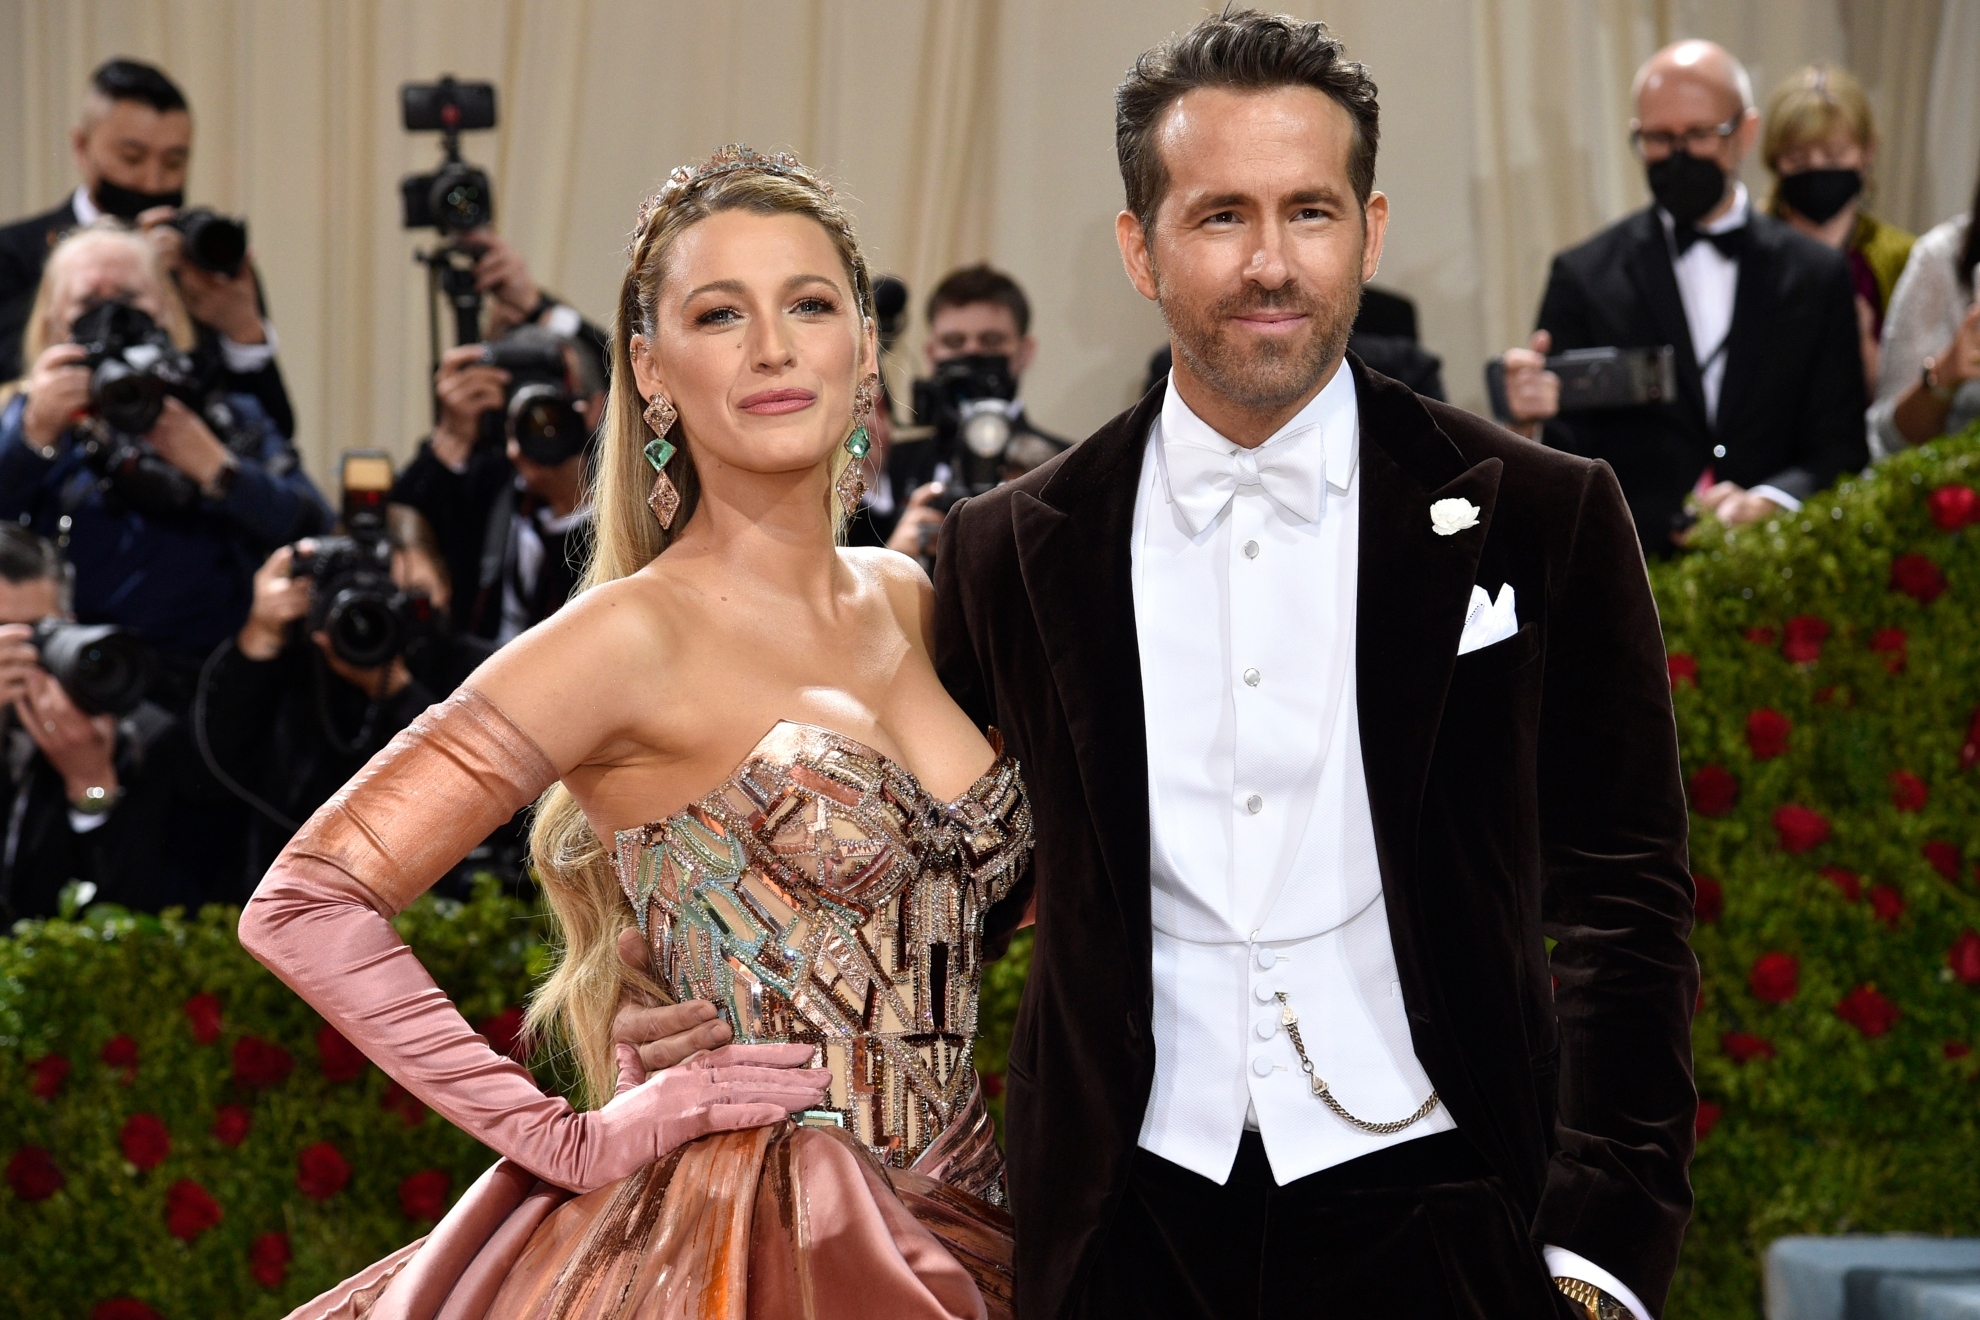 Blake Lively sends message of female empowerment, jokes with